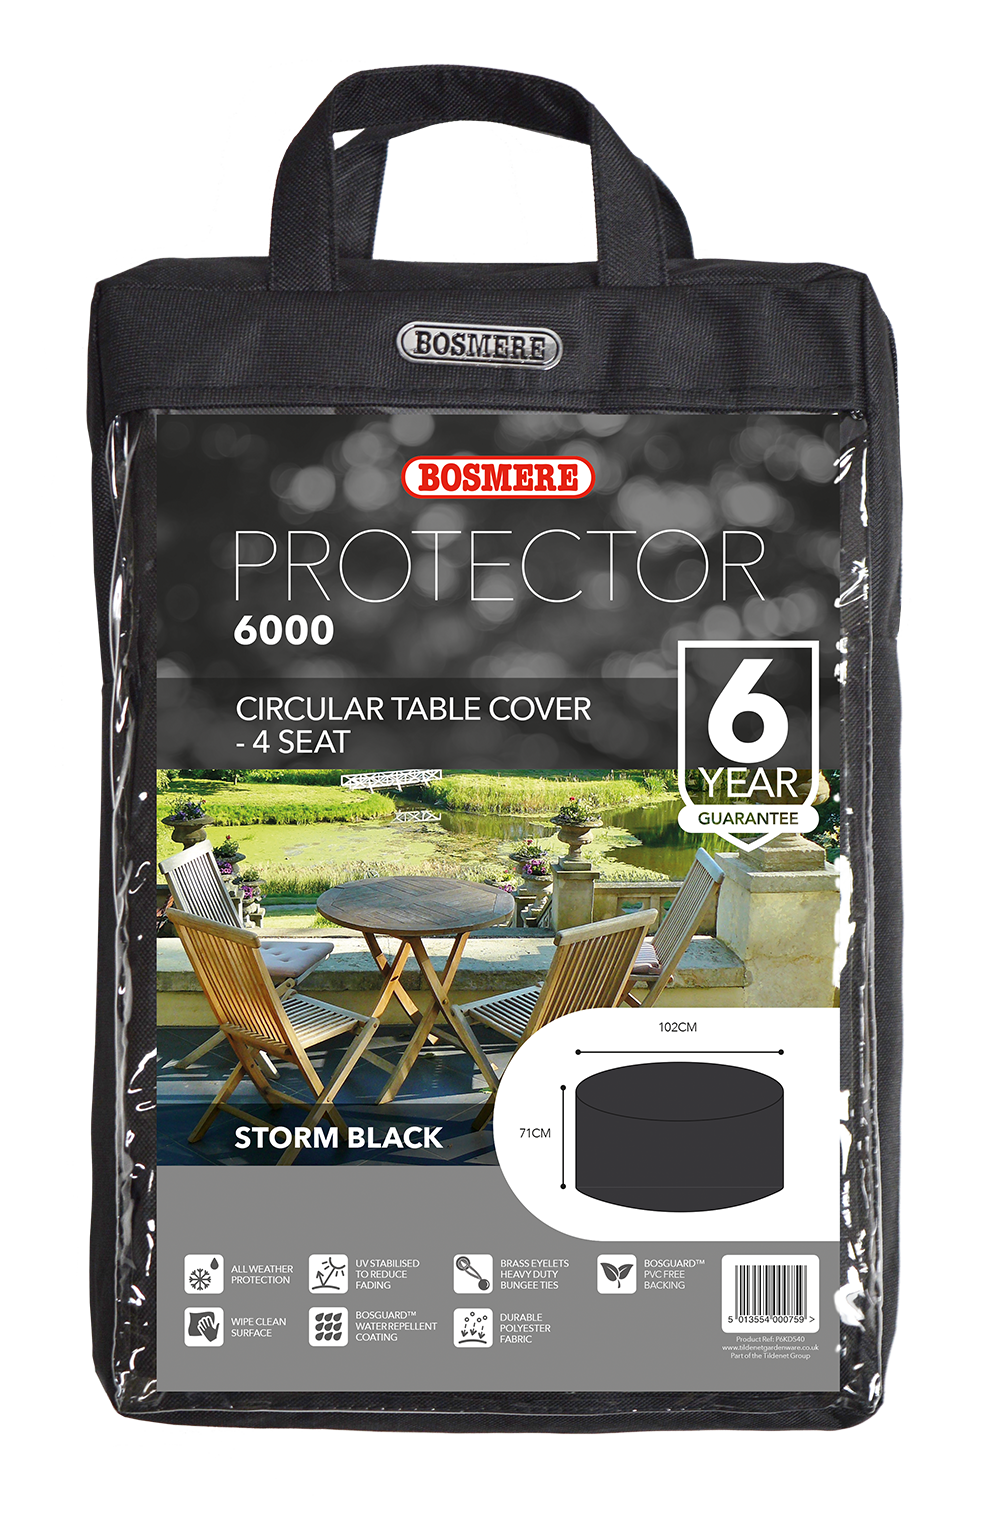 Bosmere Protector 6000 Circular Table Cover - 4 seat (Black)